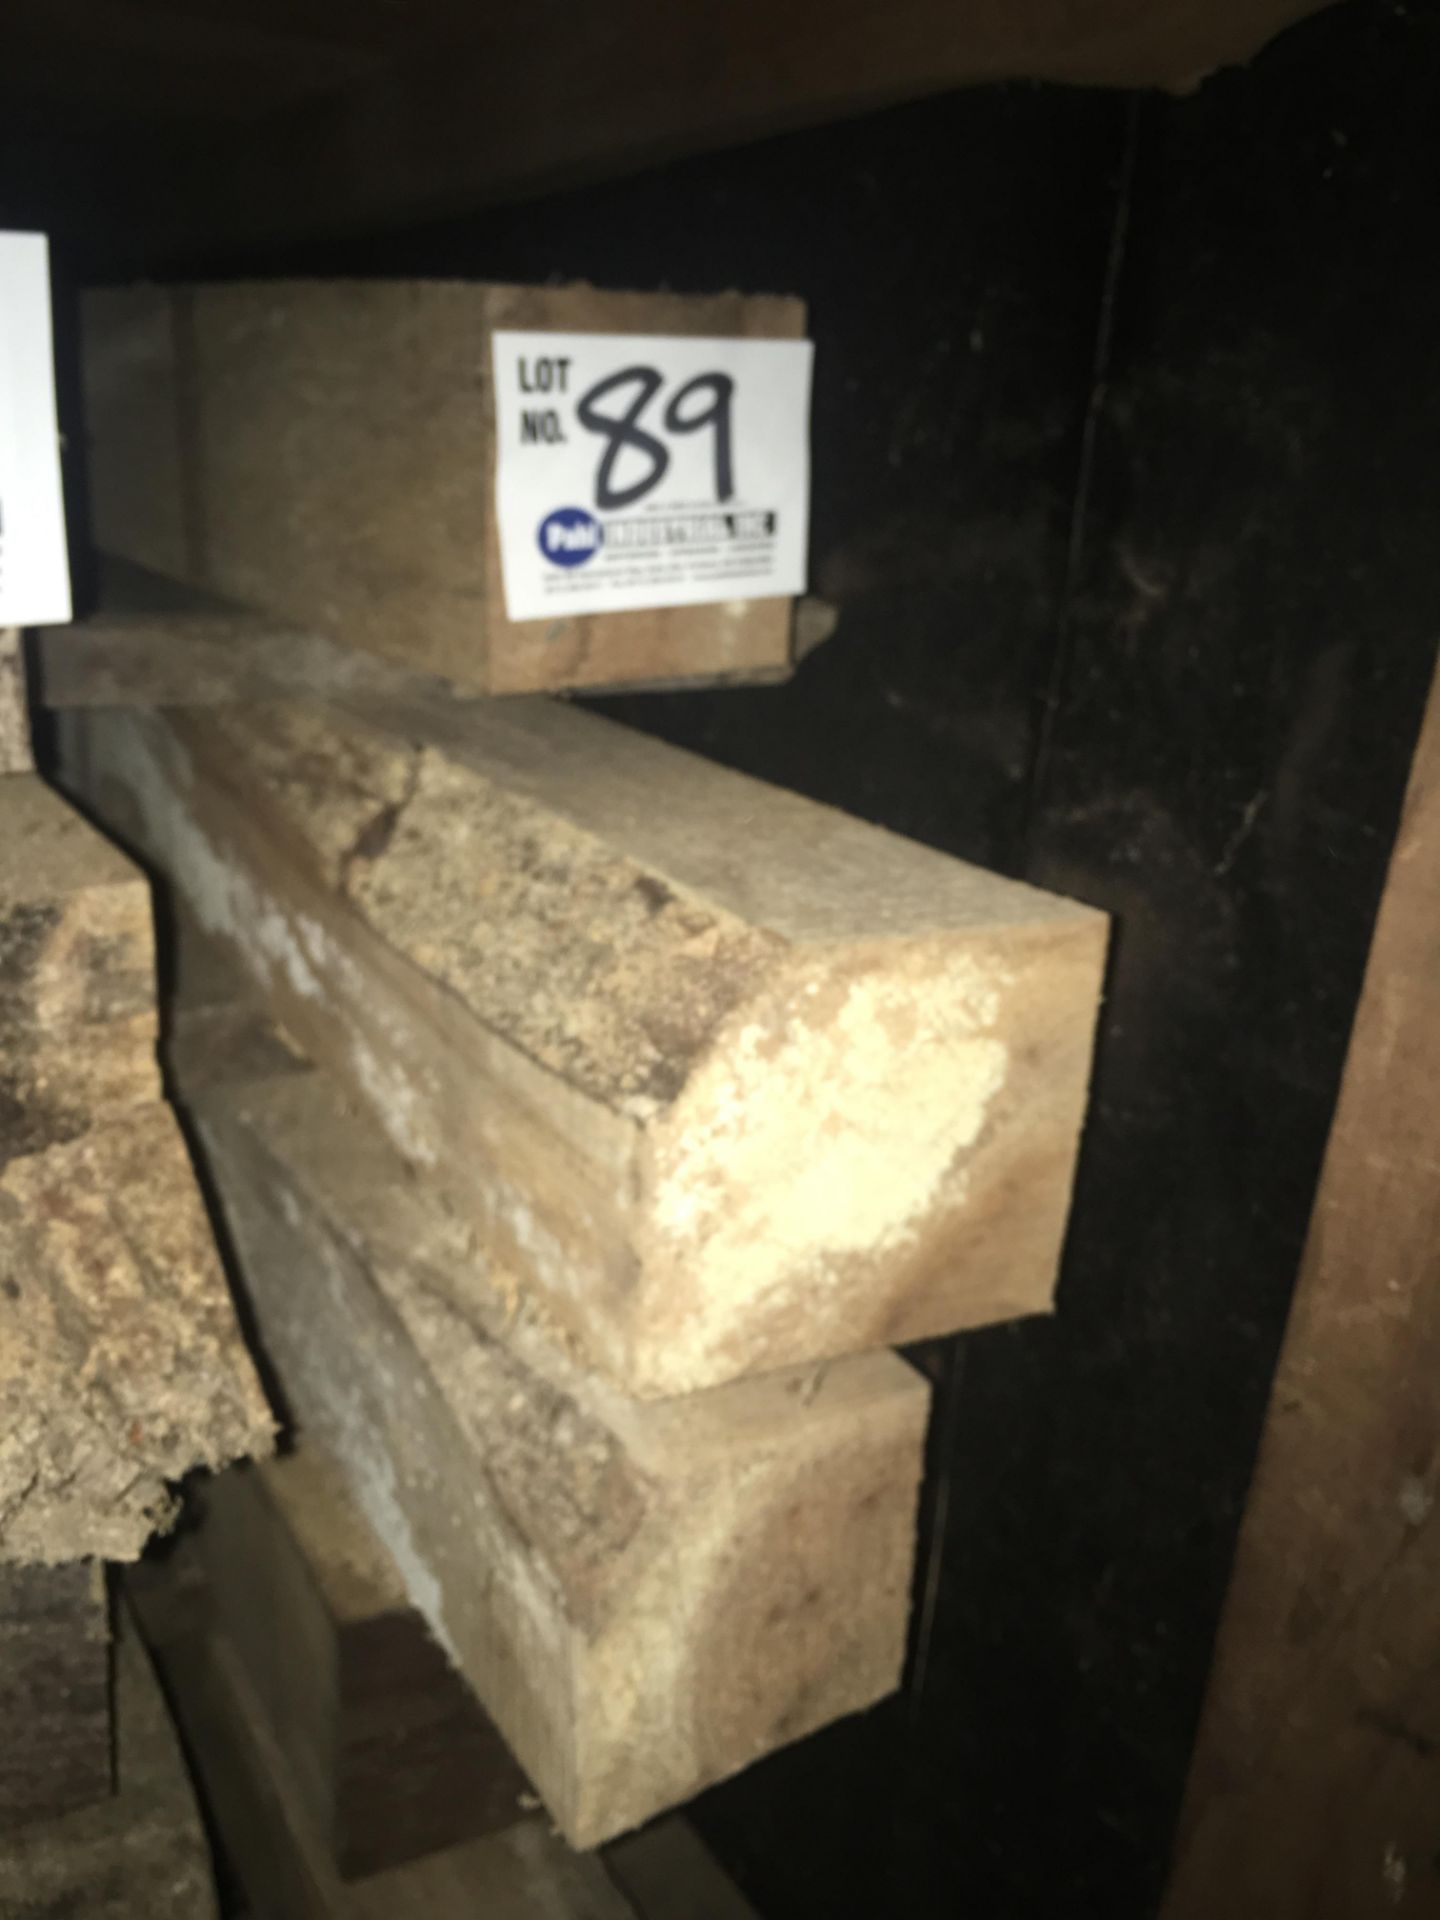 5 Kiln Dried Myrtlewood boards 4" x 4" x 4.5' Long - approximately 30 bd ft